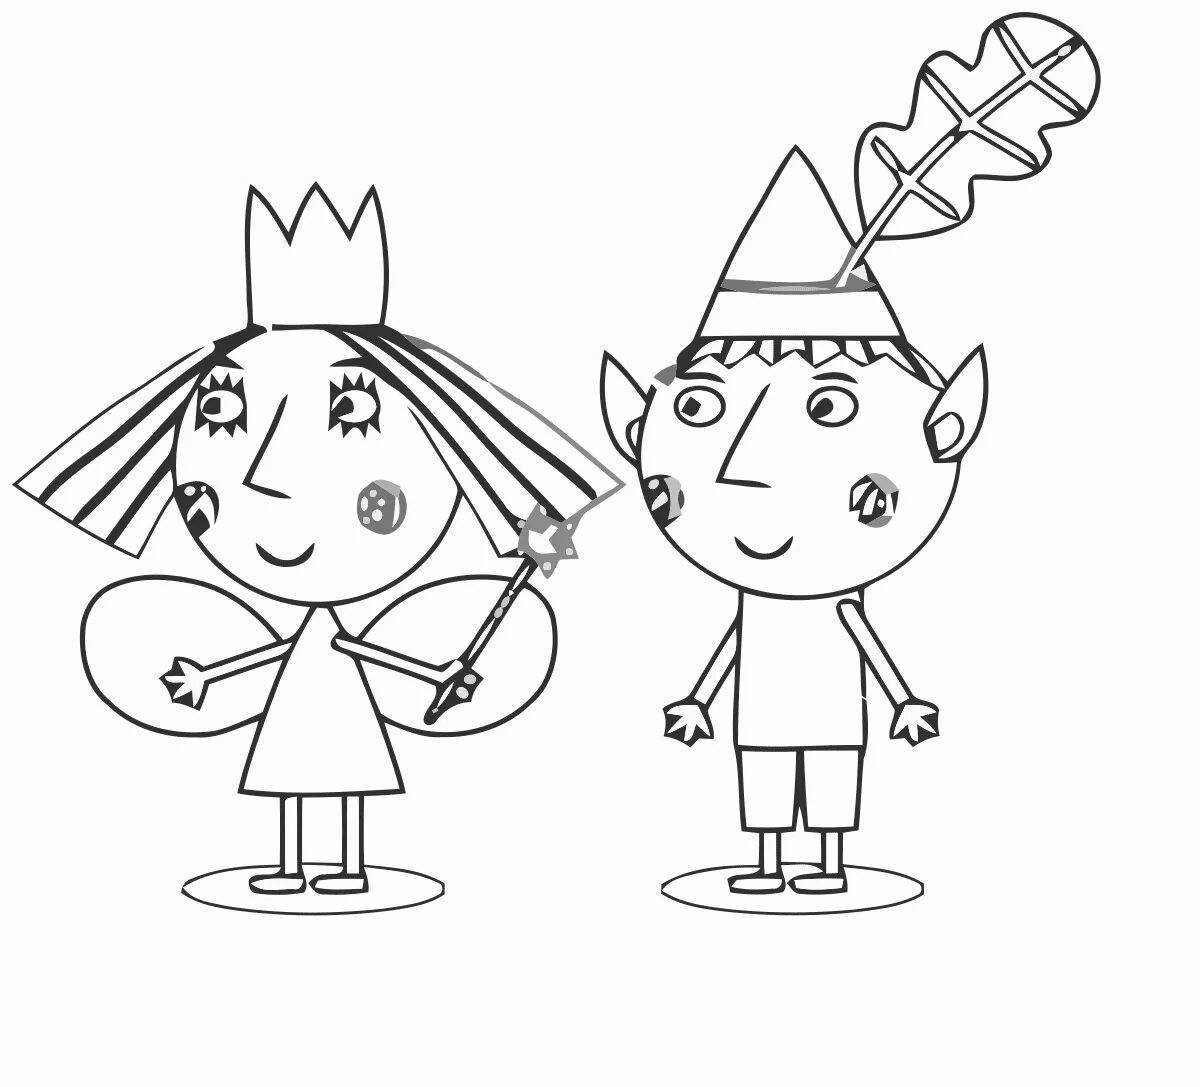 Coloring book glowing ben and holly